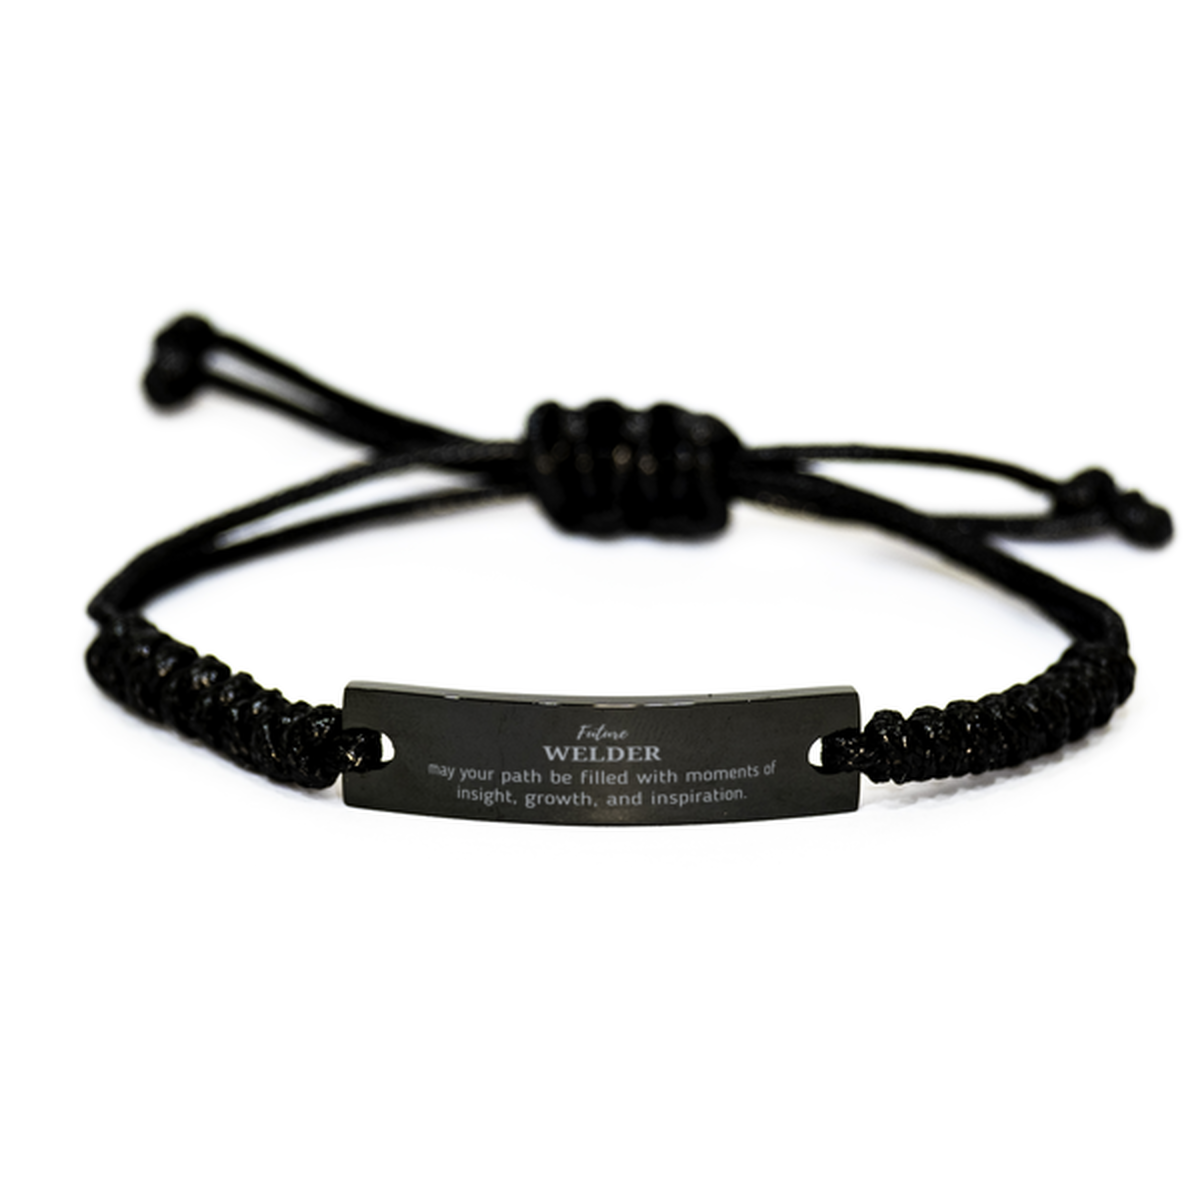 Future Welder Gifts, May your path be filled with moments of insight, Graduation Gifts for New Welder, Christmas Unique Black Rope Bracelet For Men, Women, Friends